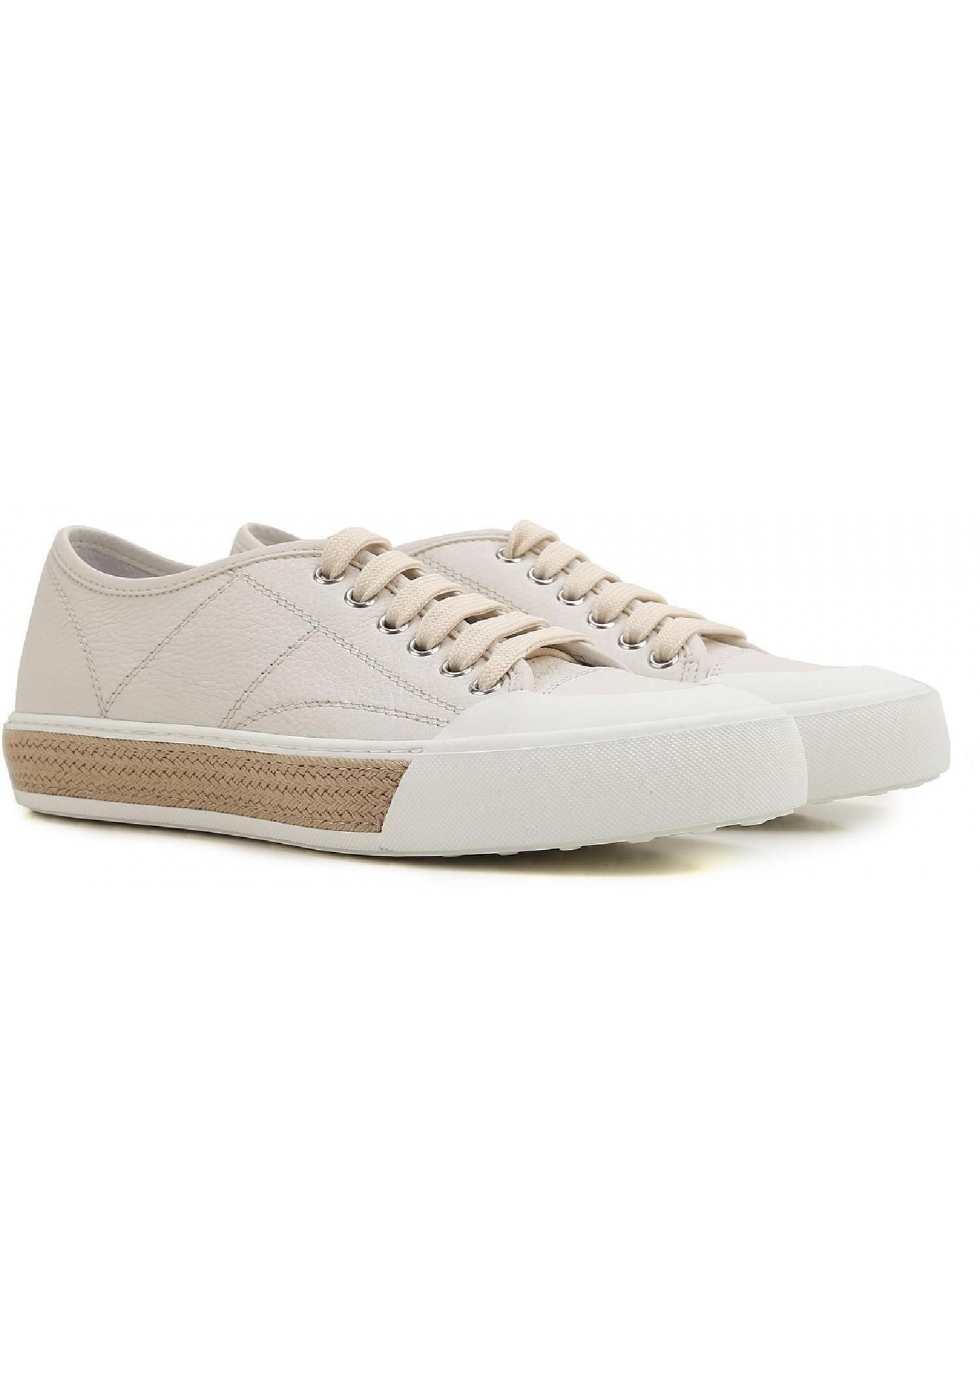 tod's sneakers womens